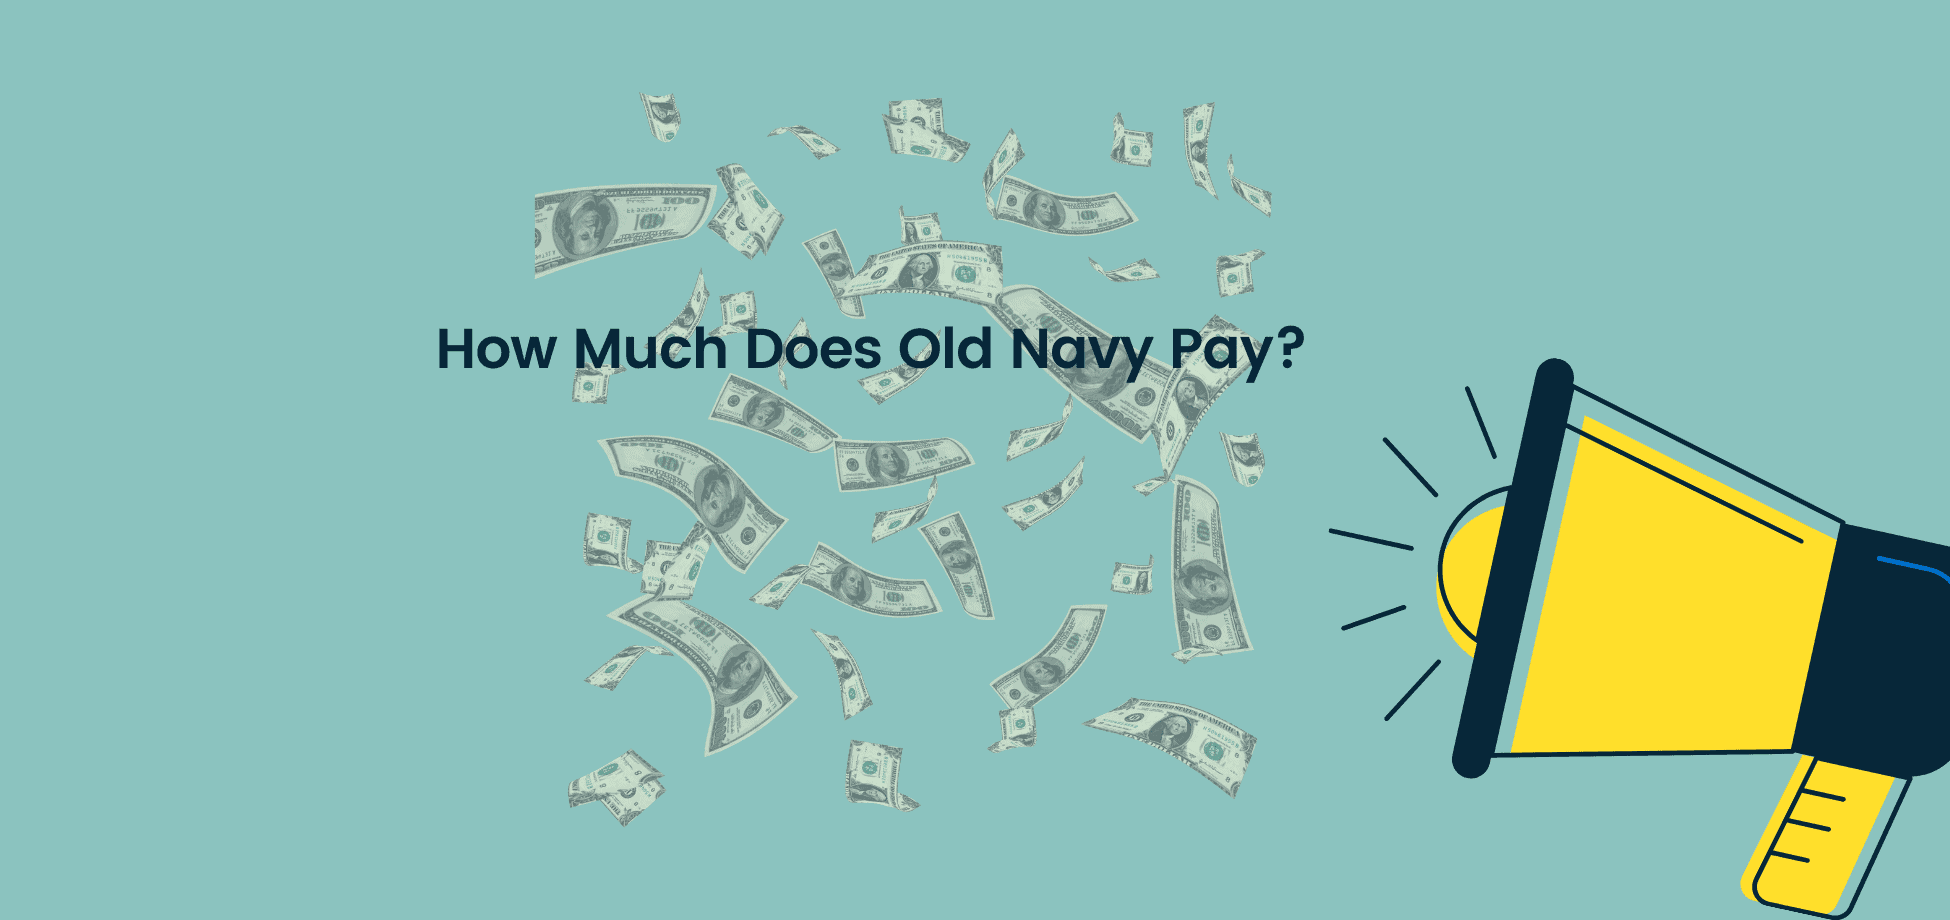 How much does Old Navy pay? Read on to find the salaries associated with the most common jobs.